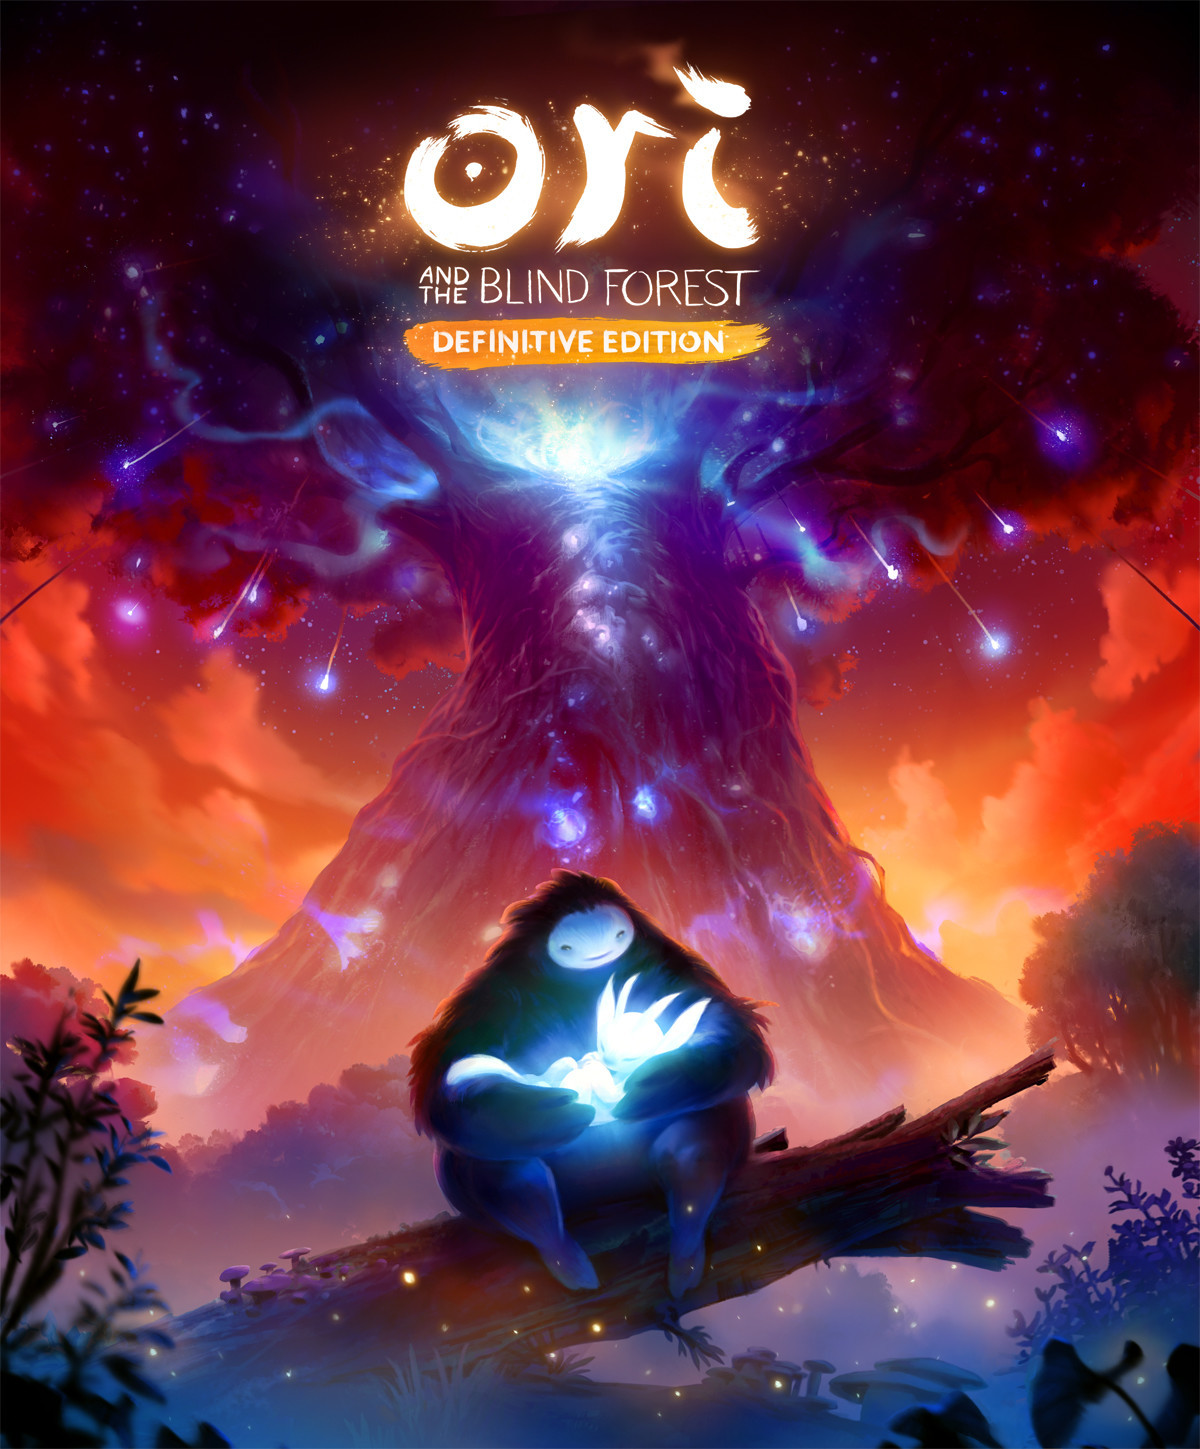 Ori and the Blind Forest: Definitive Edition (2016) PC | Лицензия